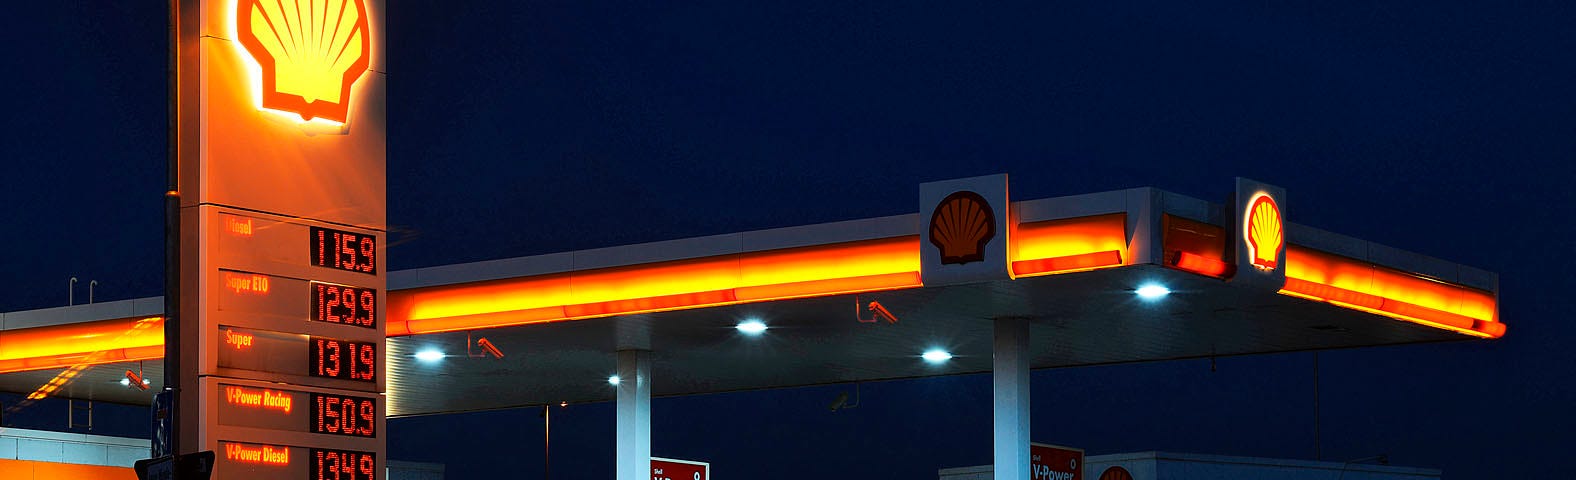 Shell’s plan to become net-zero emissions